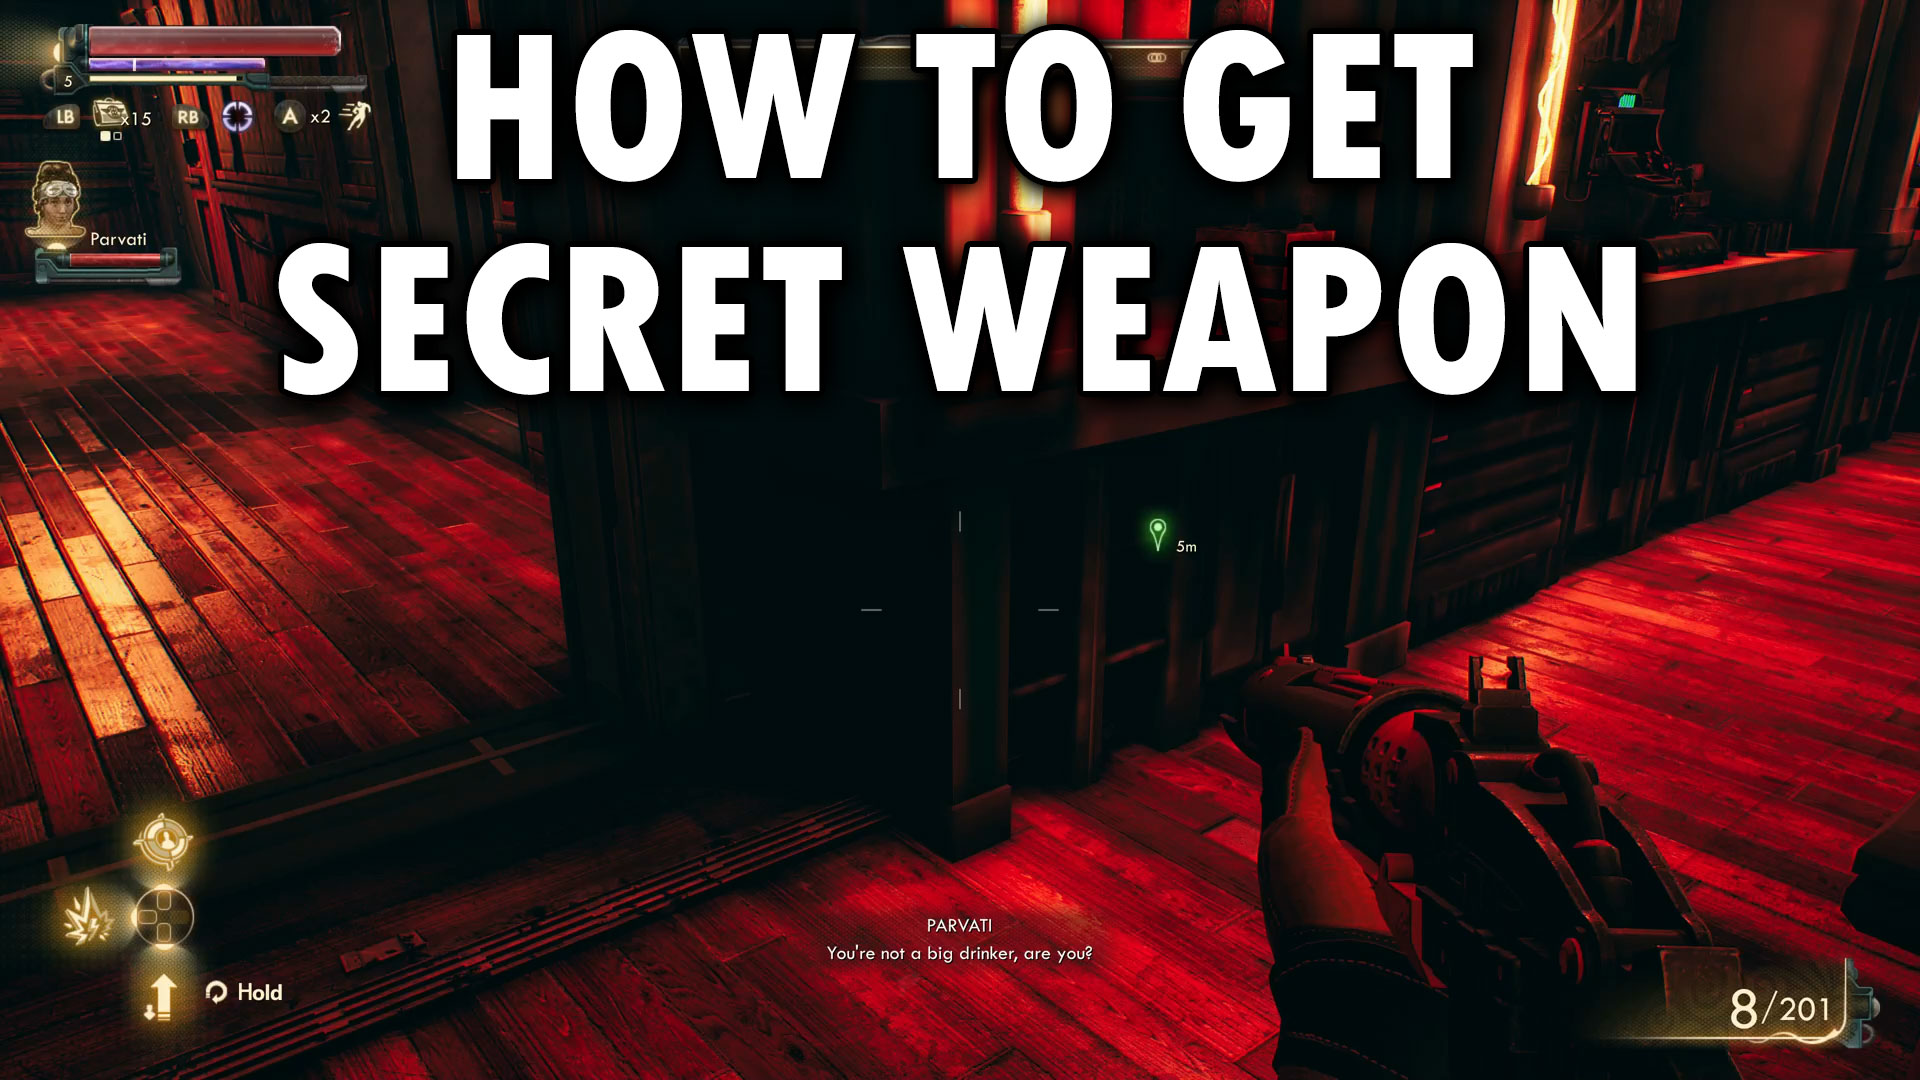 Secret Weapon Die Robot The Outer Worlds HOW TO GET SECRET WEAPON